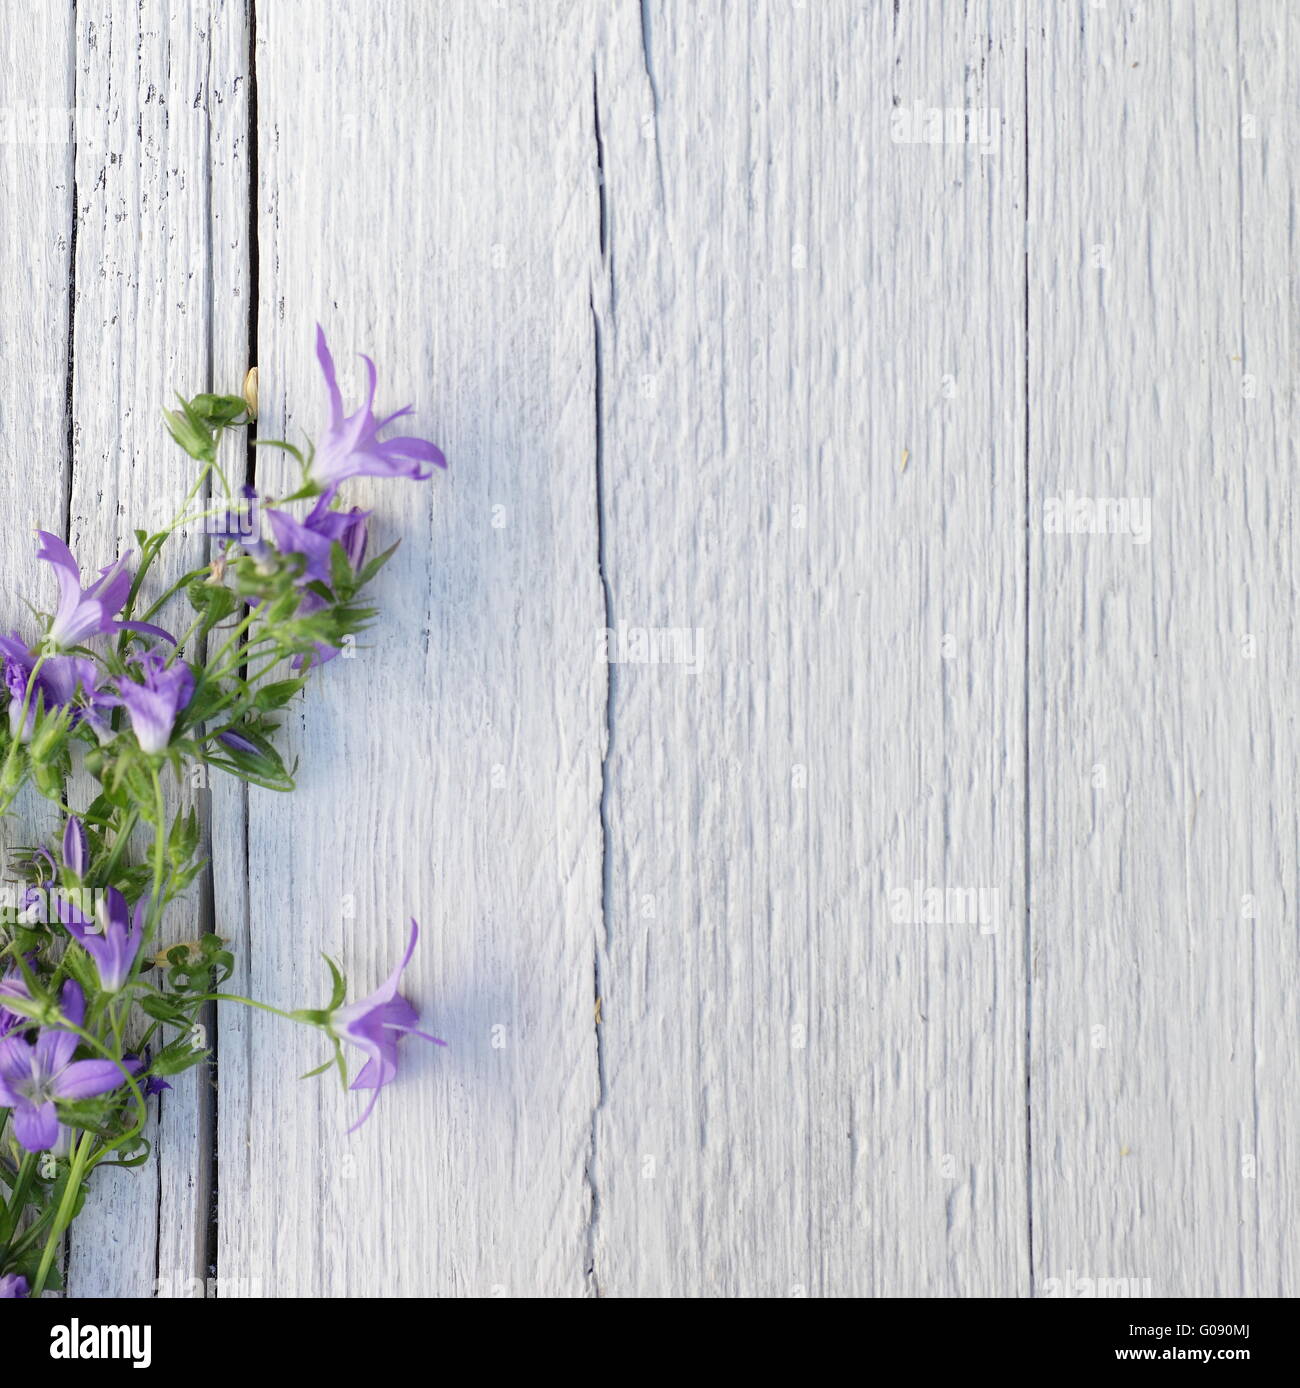 Bunch of purple flowers on white painted wood Stock Photo